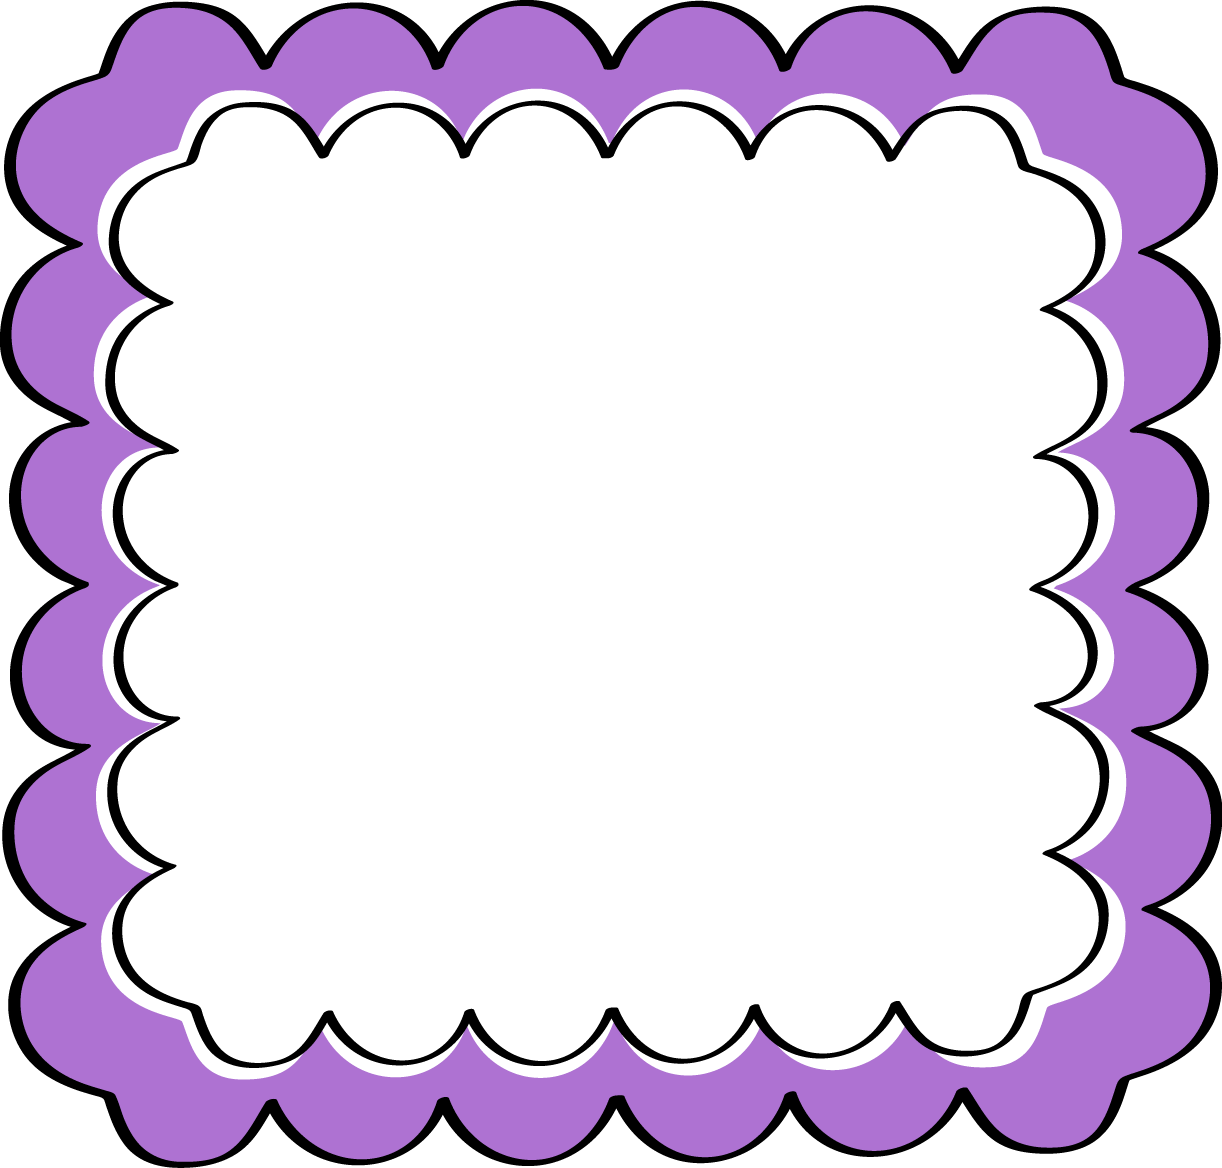 free clip art borders and frames - photo #43